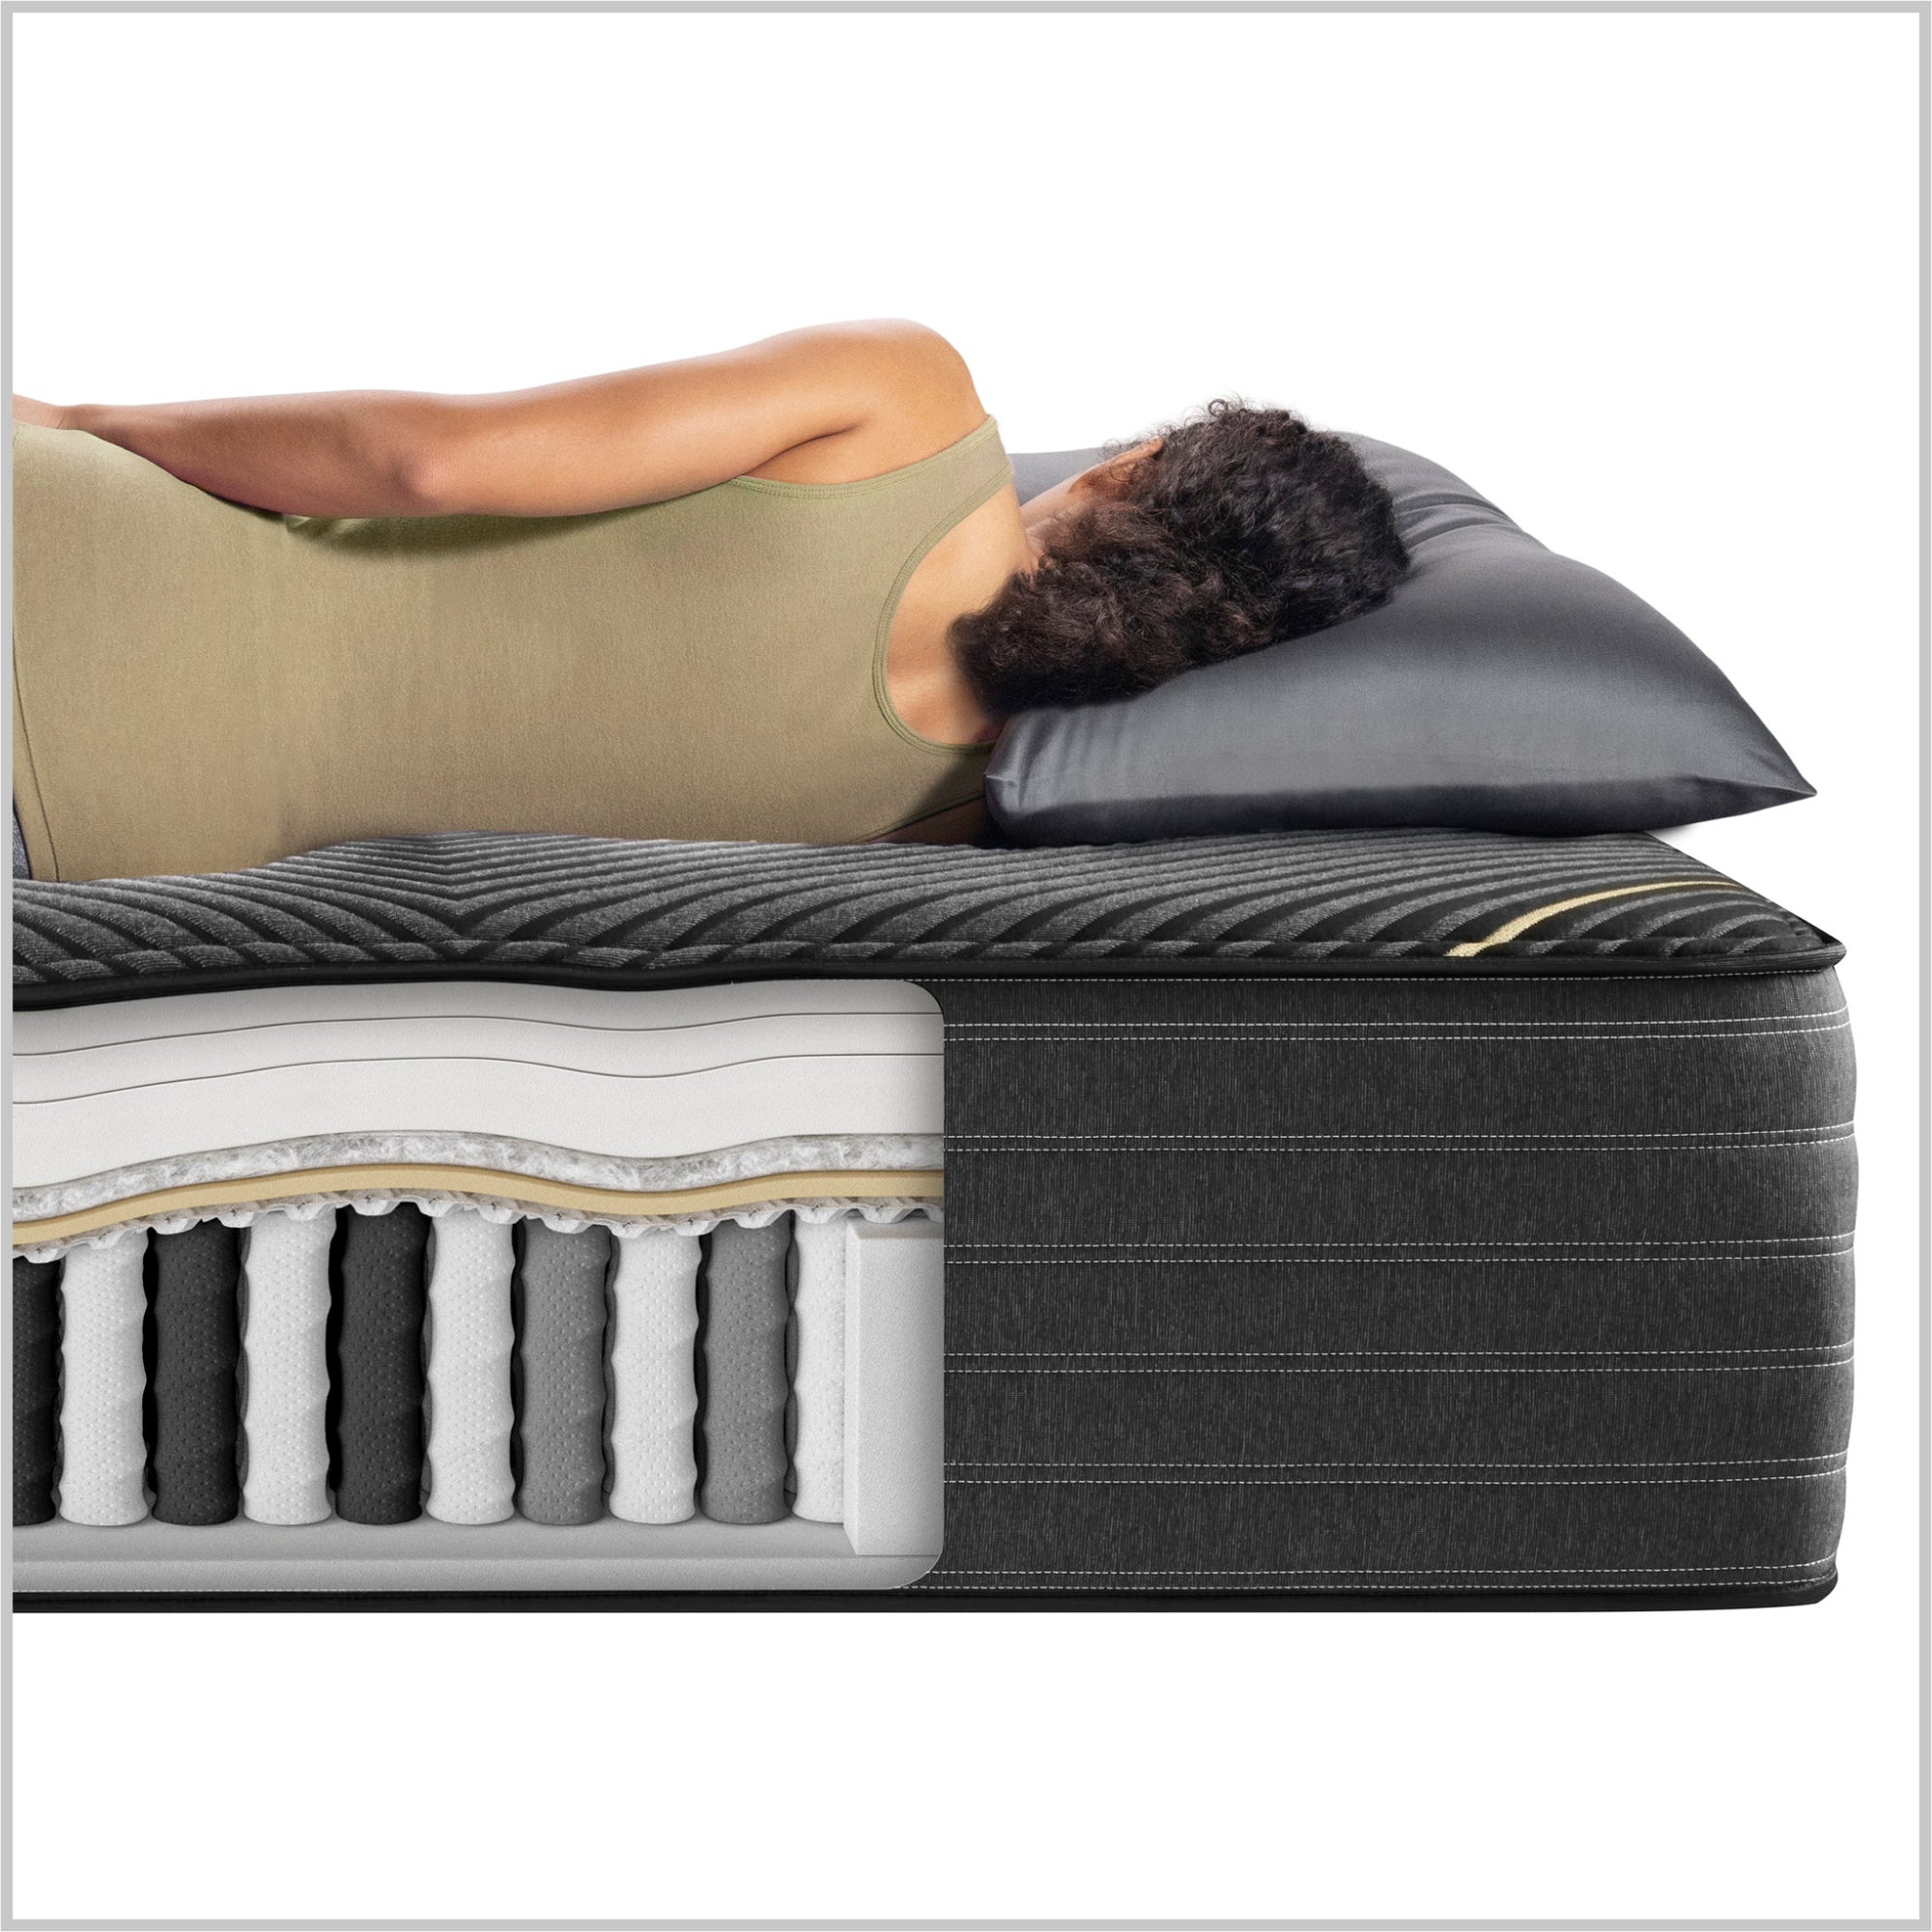 Diagram showing the material inside the Beautyrest Black hybrid mattress||series: exceptional kx-class||feel: plush